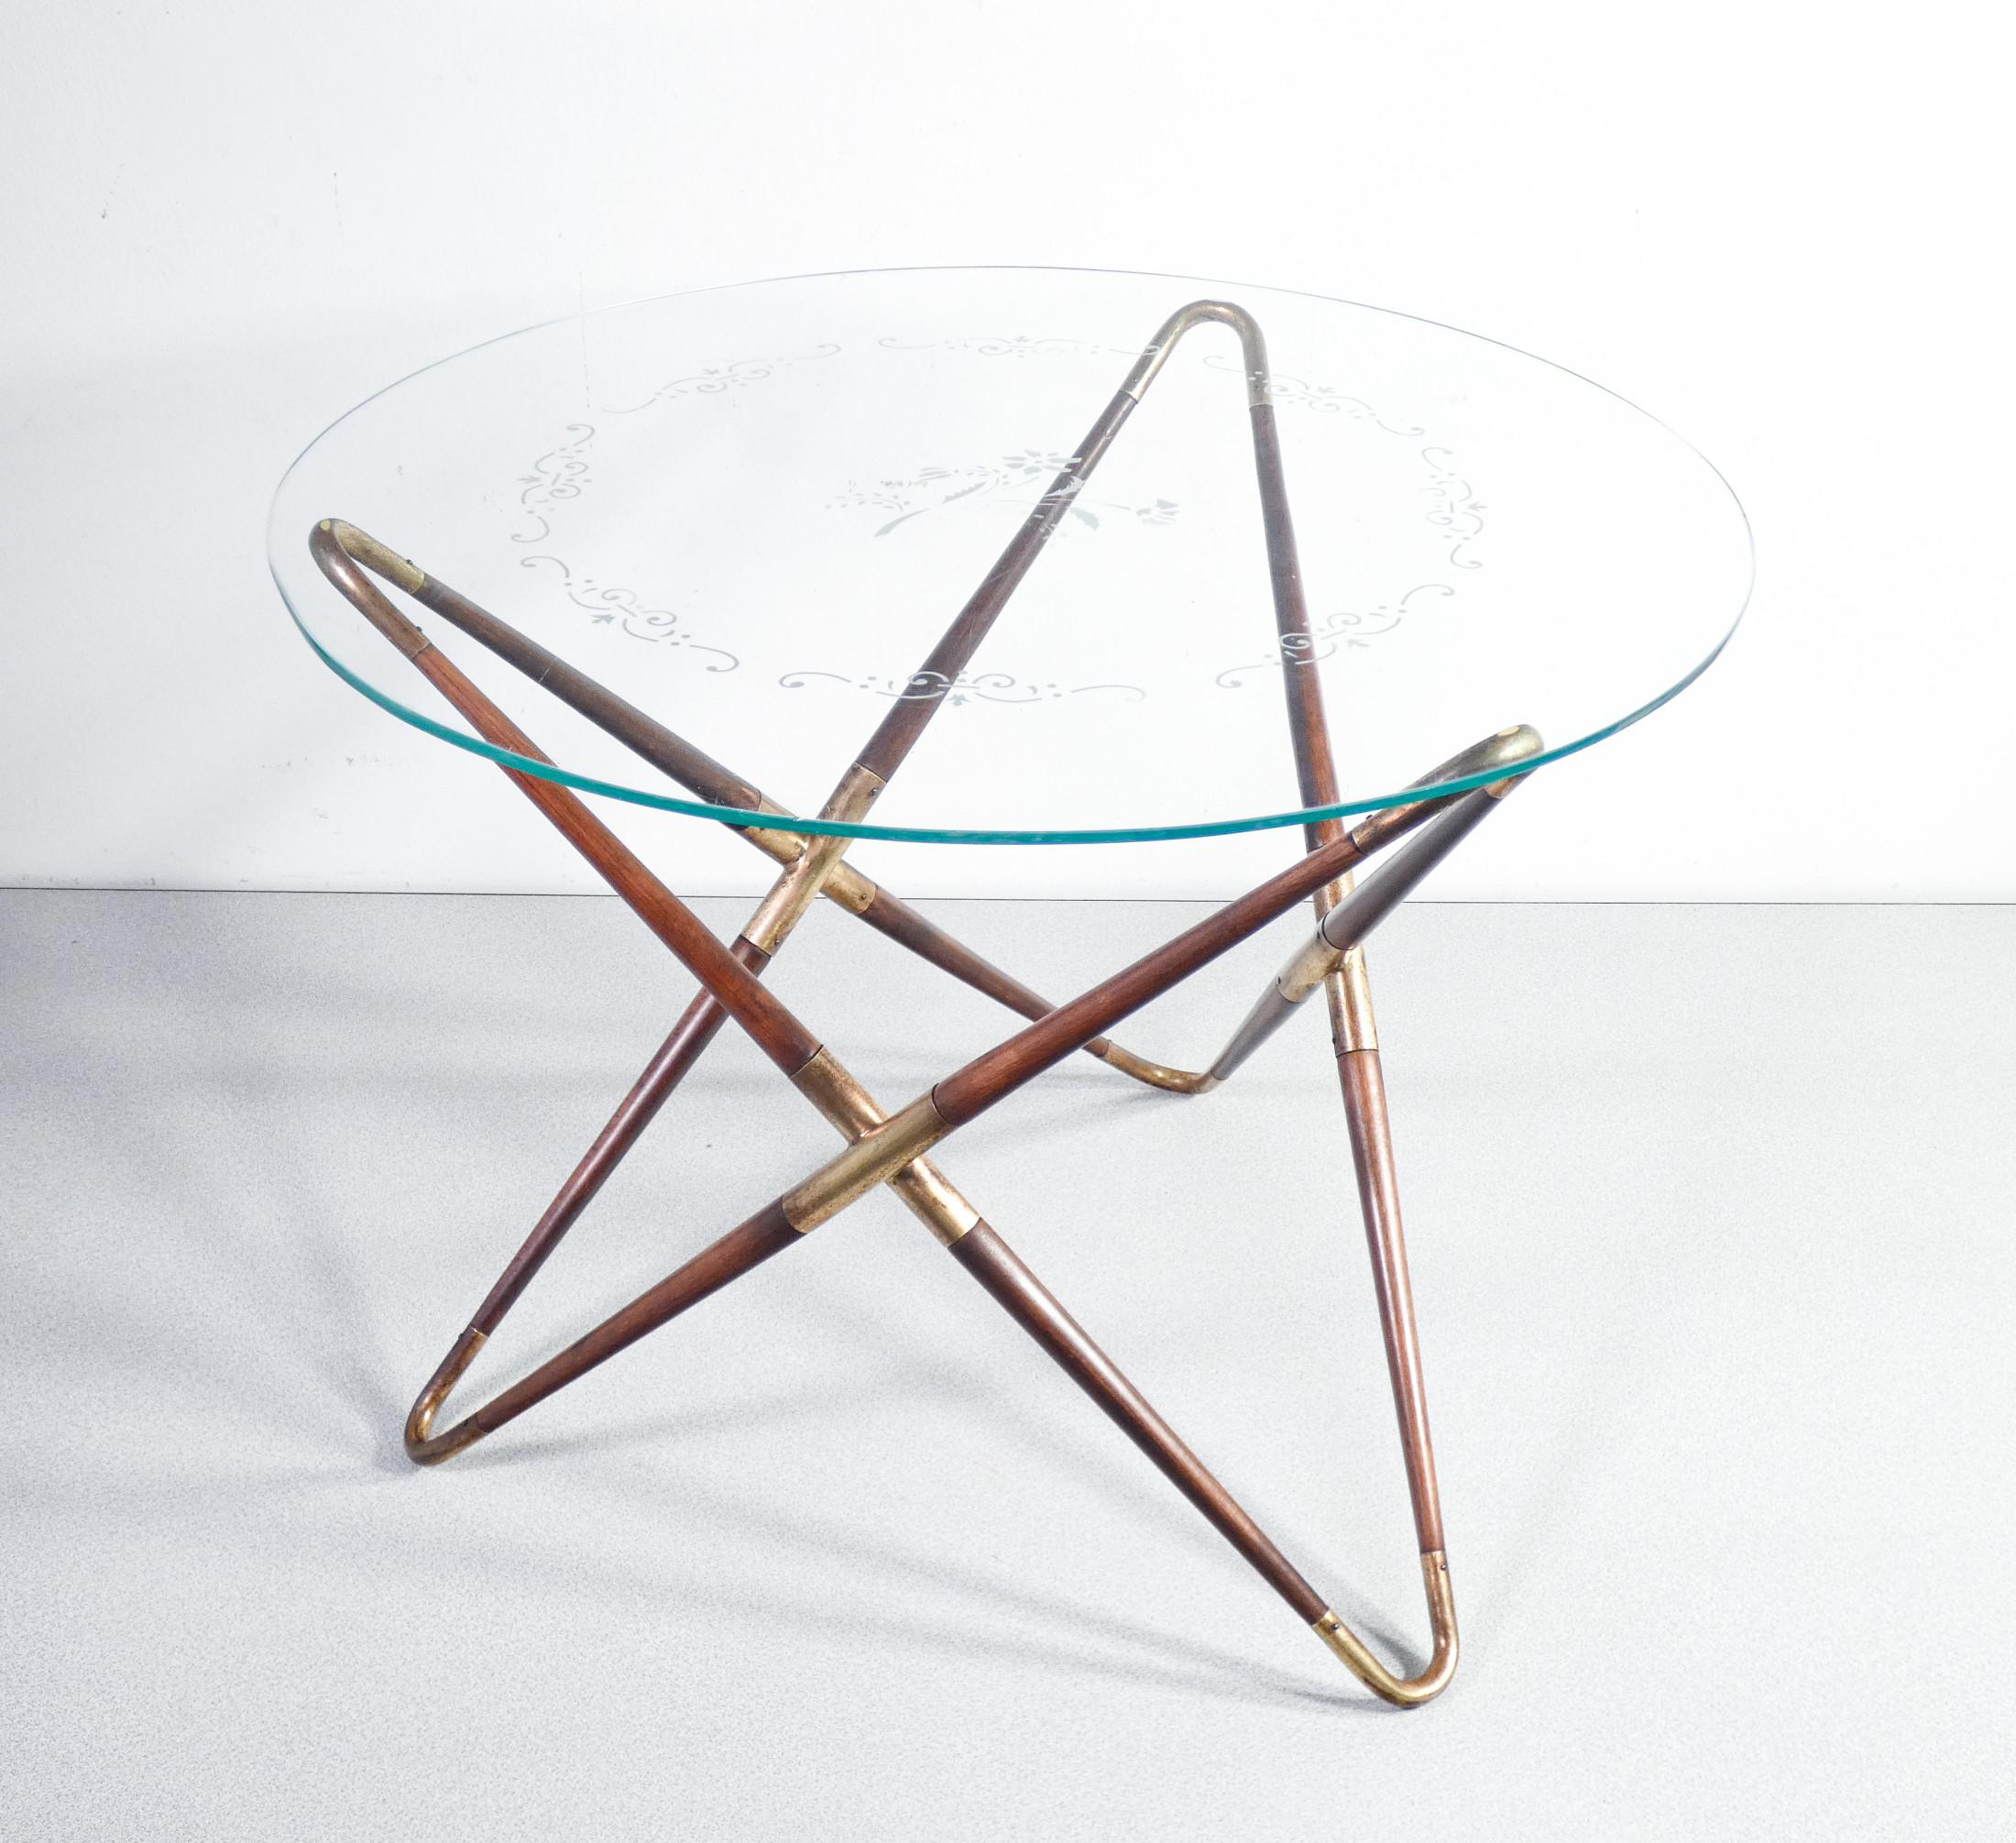 Coffee table
design Cesare LACCA,
in wood and brass,
decorated glass top.
Italy, 1940s / 1950s

Origin
Italy

Period
40s / 50s

Designer
Cesare LACCA

Materials
Wood, brass, glass

Dimensions
Height: 47 cm
Top: Ø 60